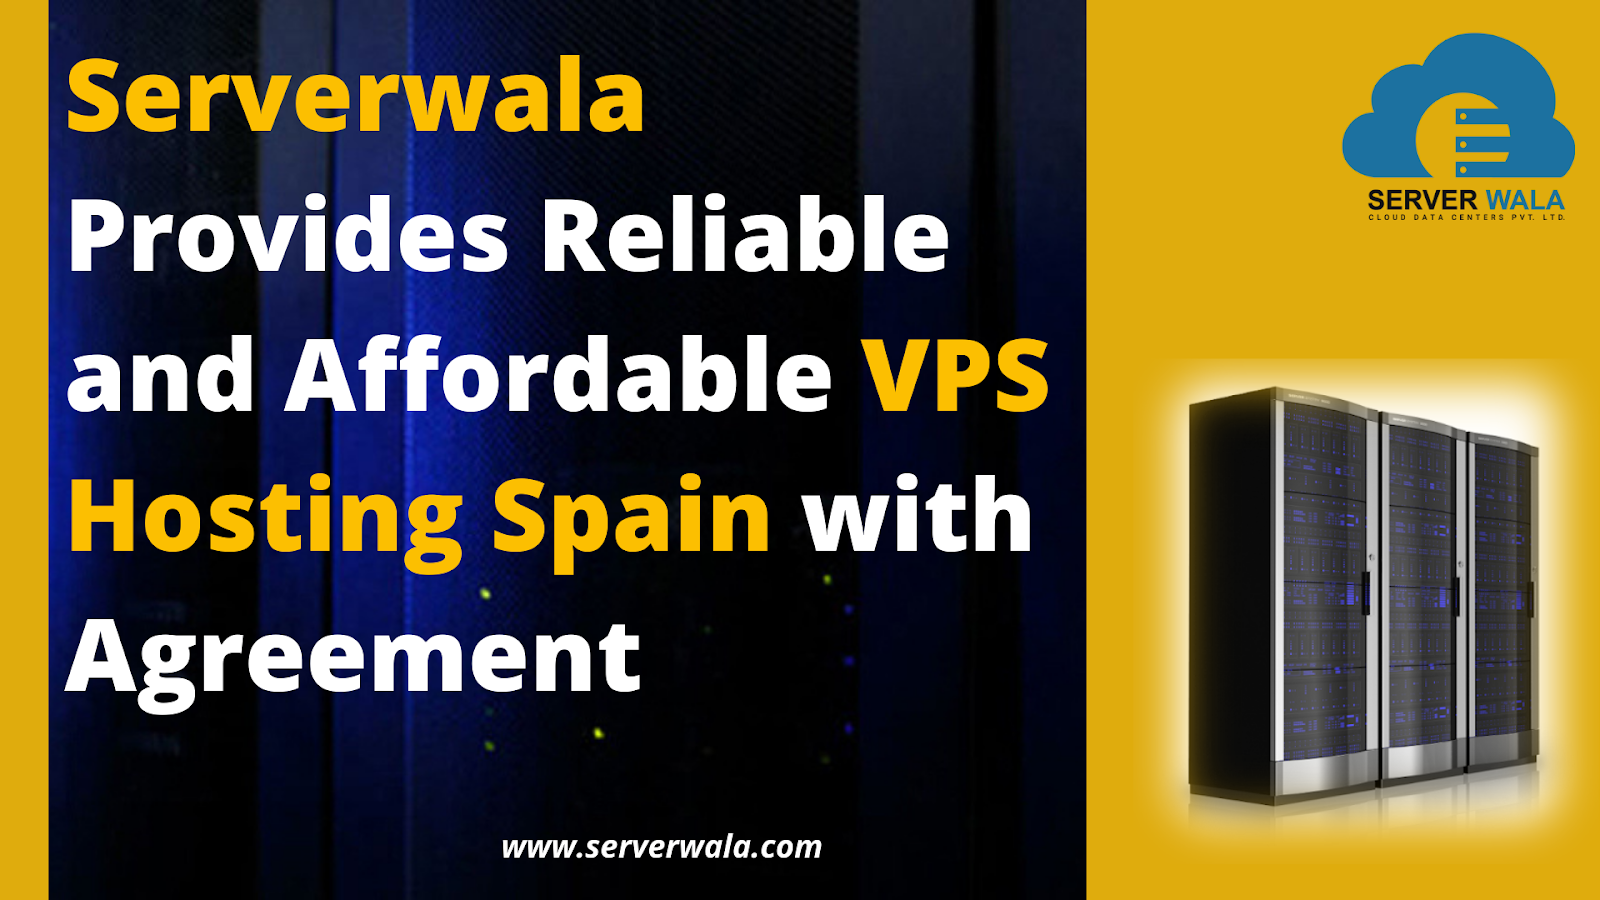 Serverwala Provides Reliable and Affordable VPS Hosting Spain with Agreement
